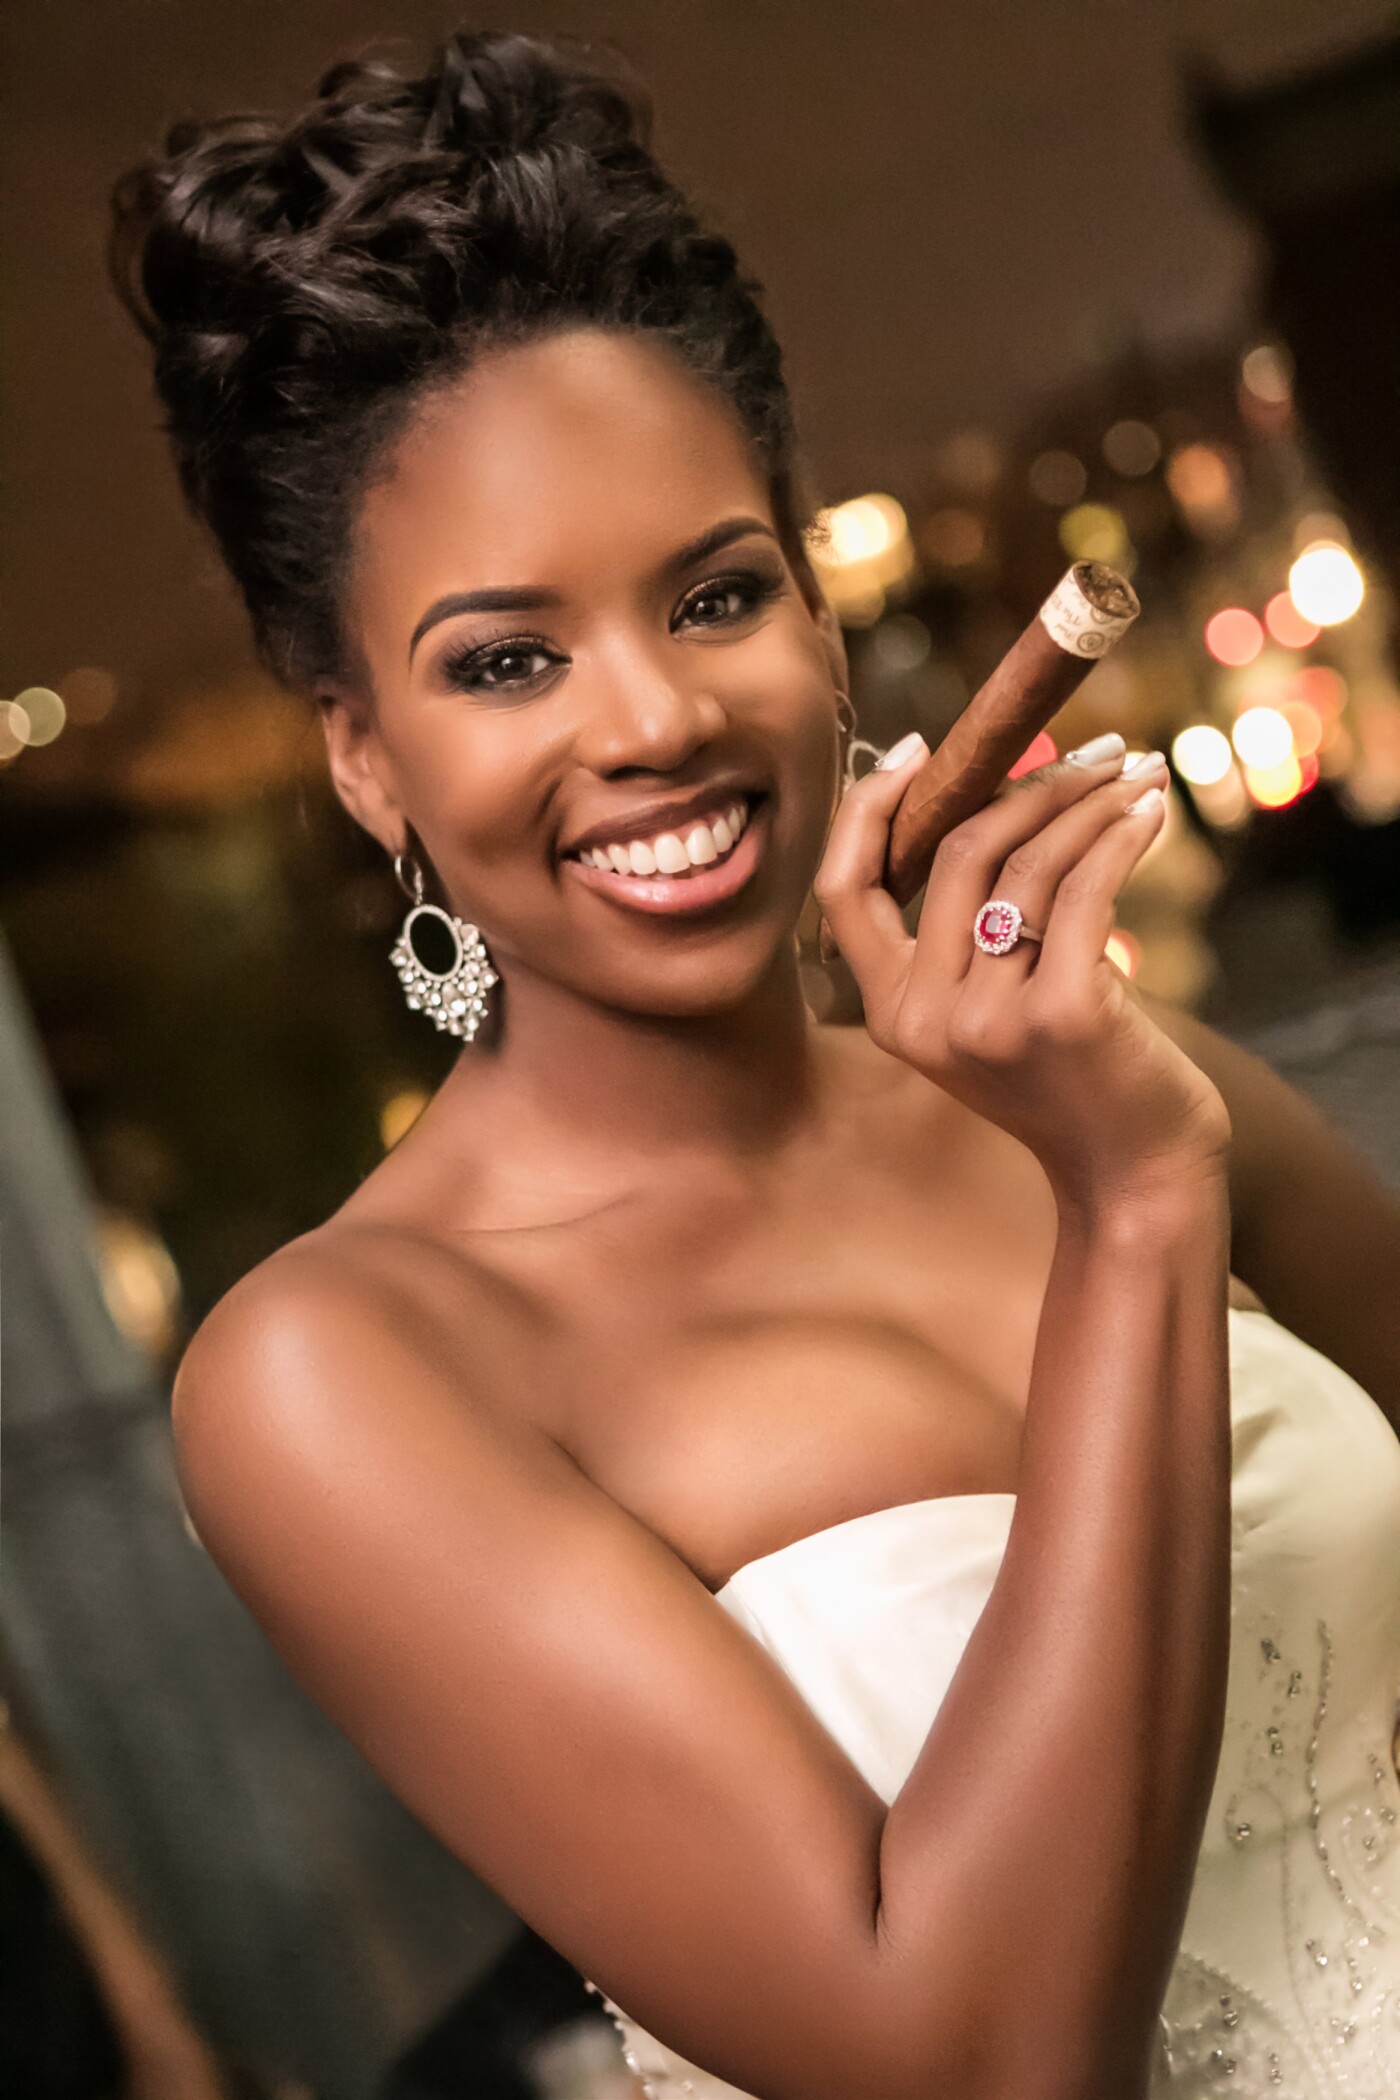 This image was taken during a wedding reception at the Pittsburgh Glass Center.  The beautiful bride walked into her groom's cigar bar, grabbed a cigar and turned with a smile on her face.  In that instant, a moment was captured that will last a lifetime.